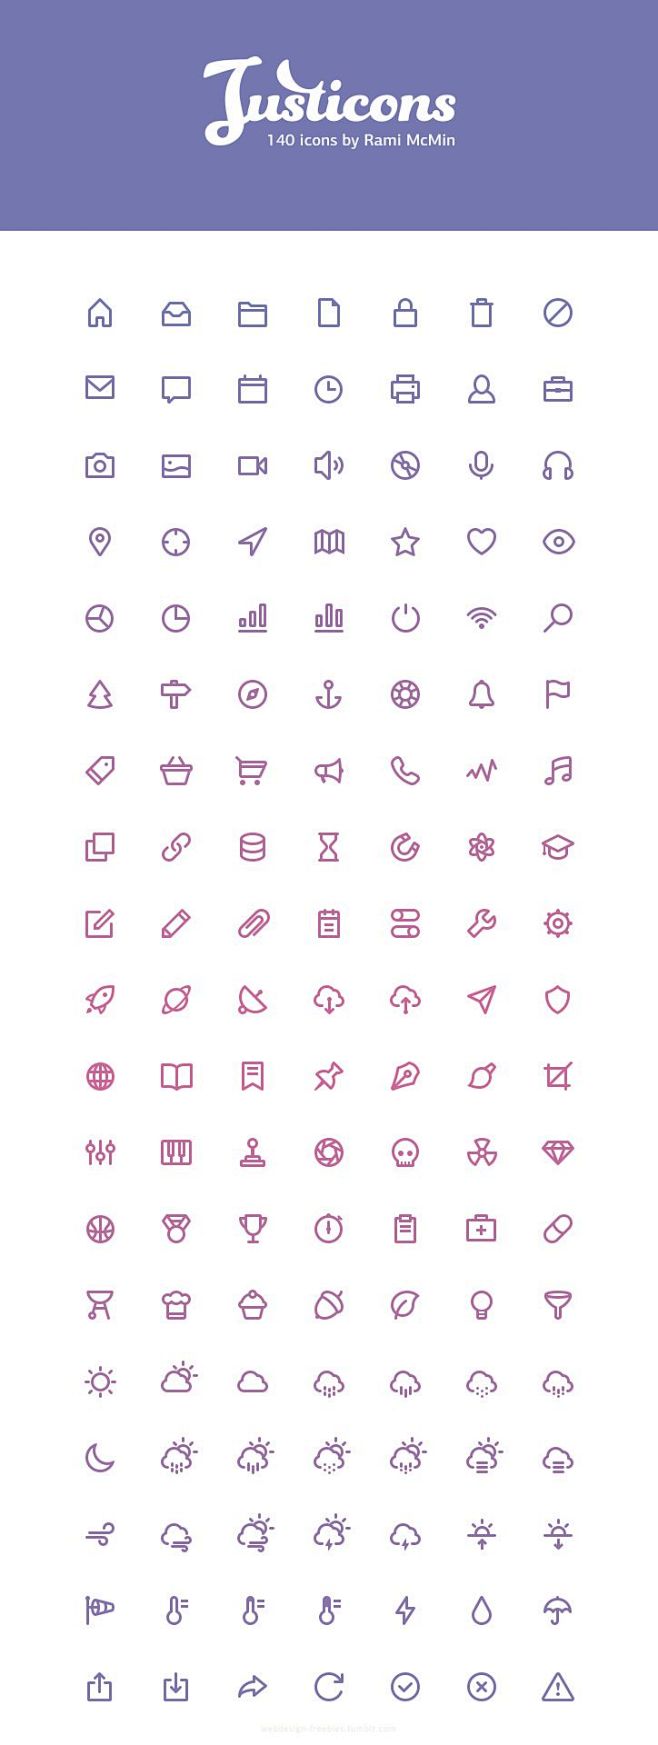 Justicons - 140 Free...